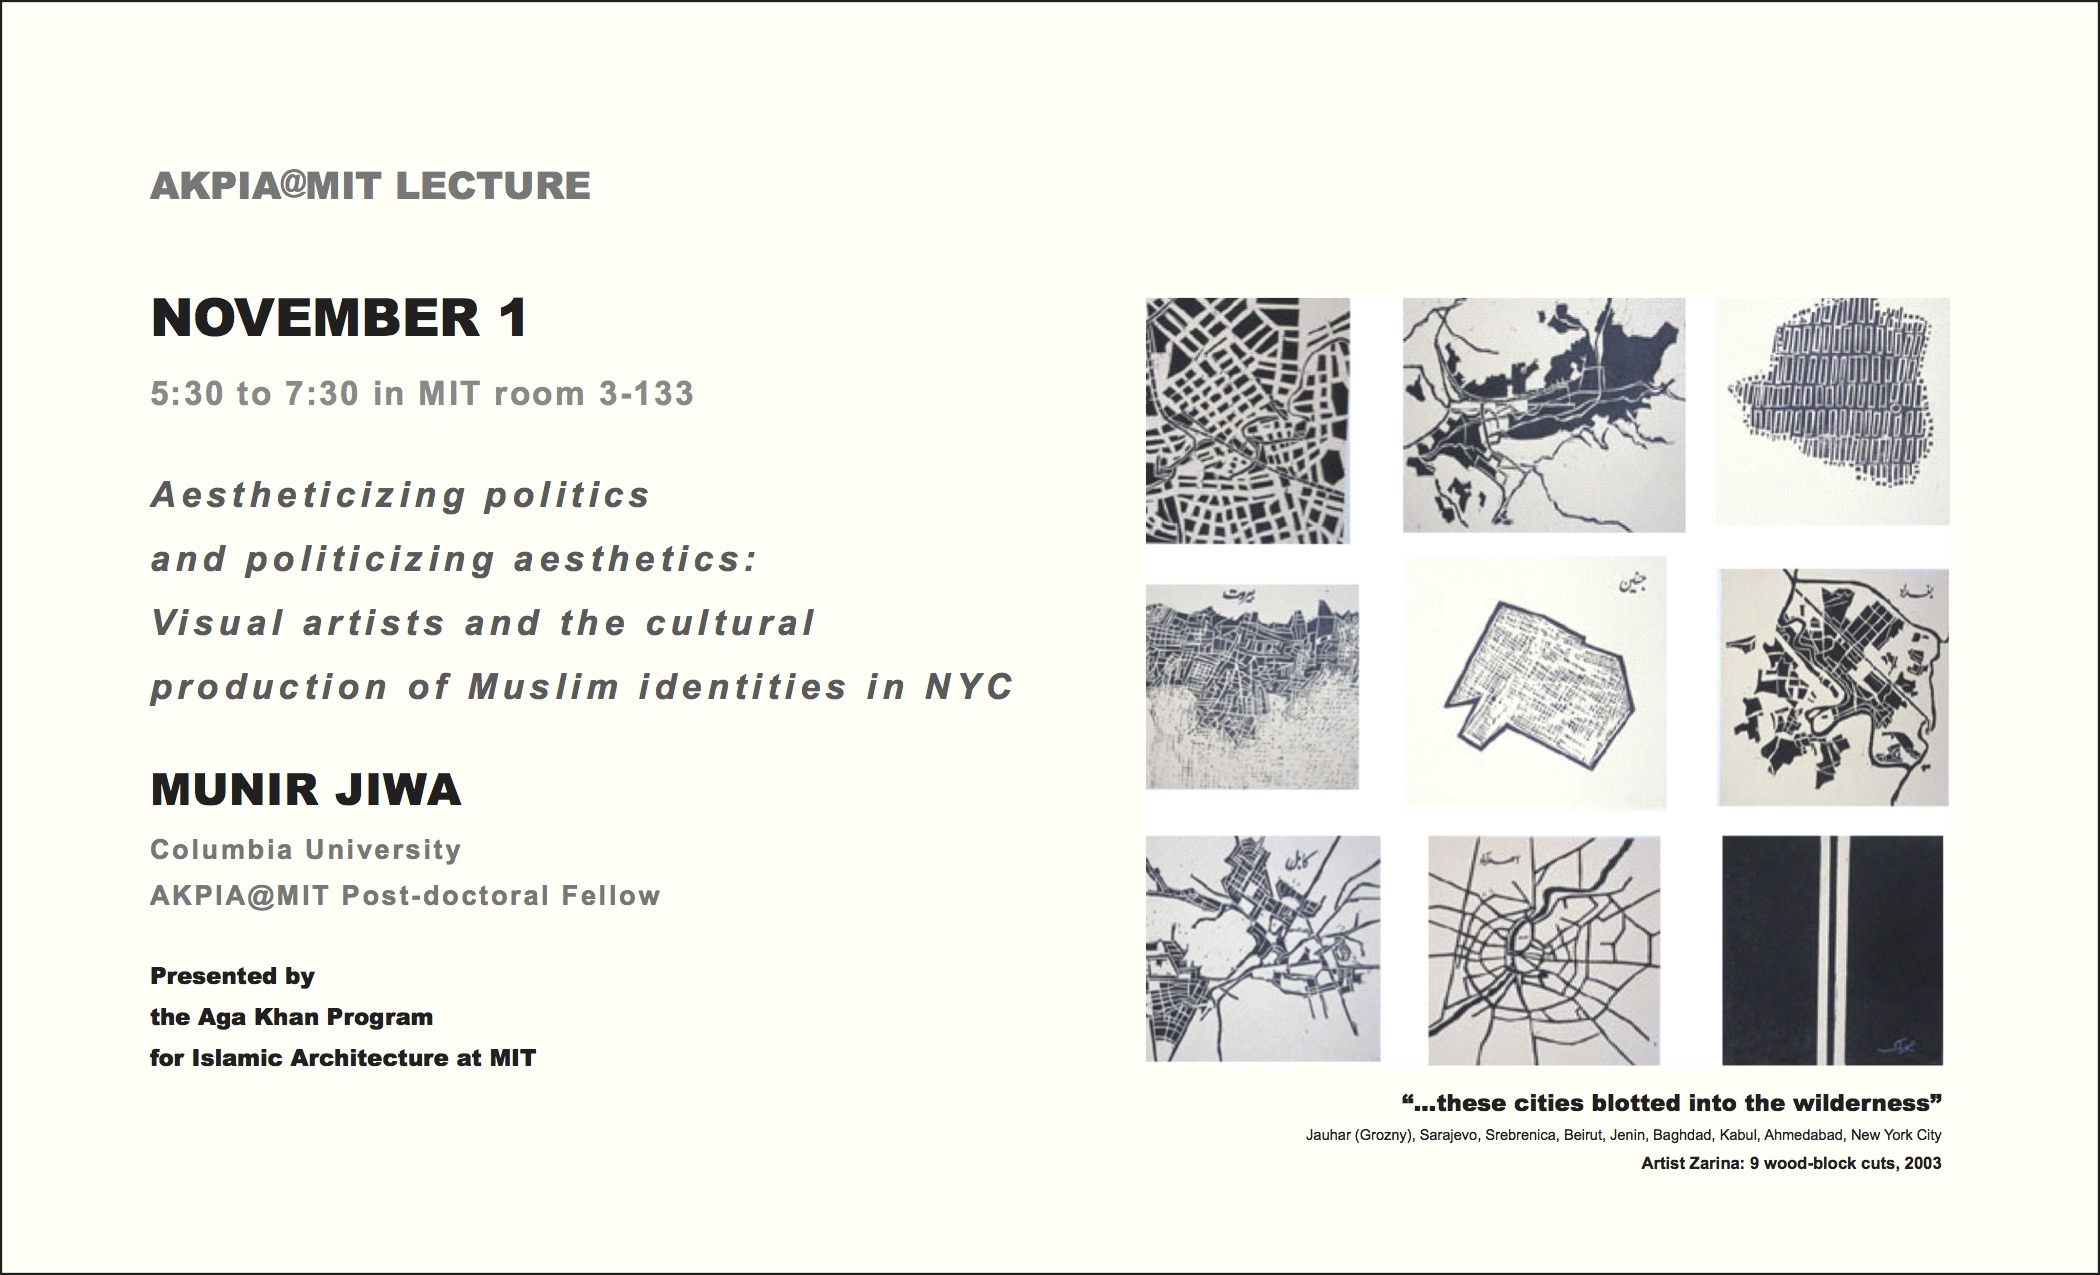 Poster for The Fall 2004 "Aesteticizing politics and politicalizing aestetics: Visual artists and the cultural production of Muslim identities in NYC" Lecture